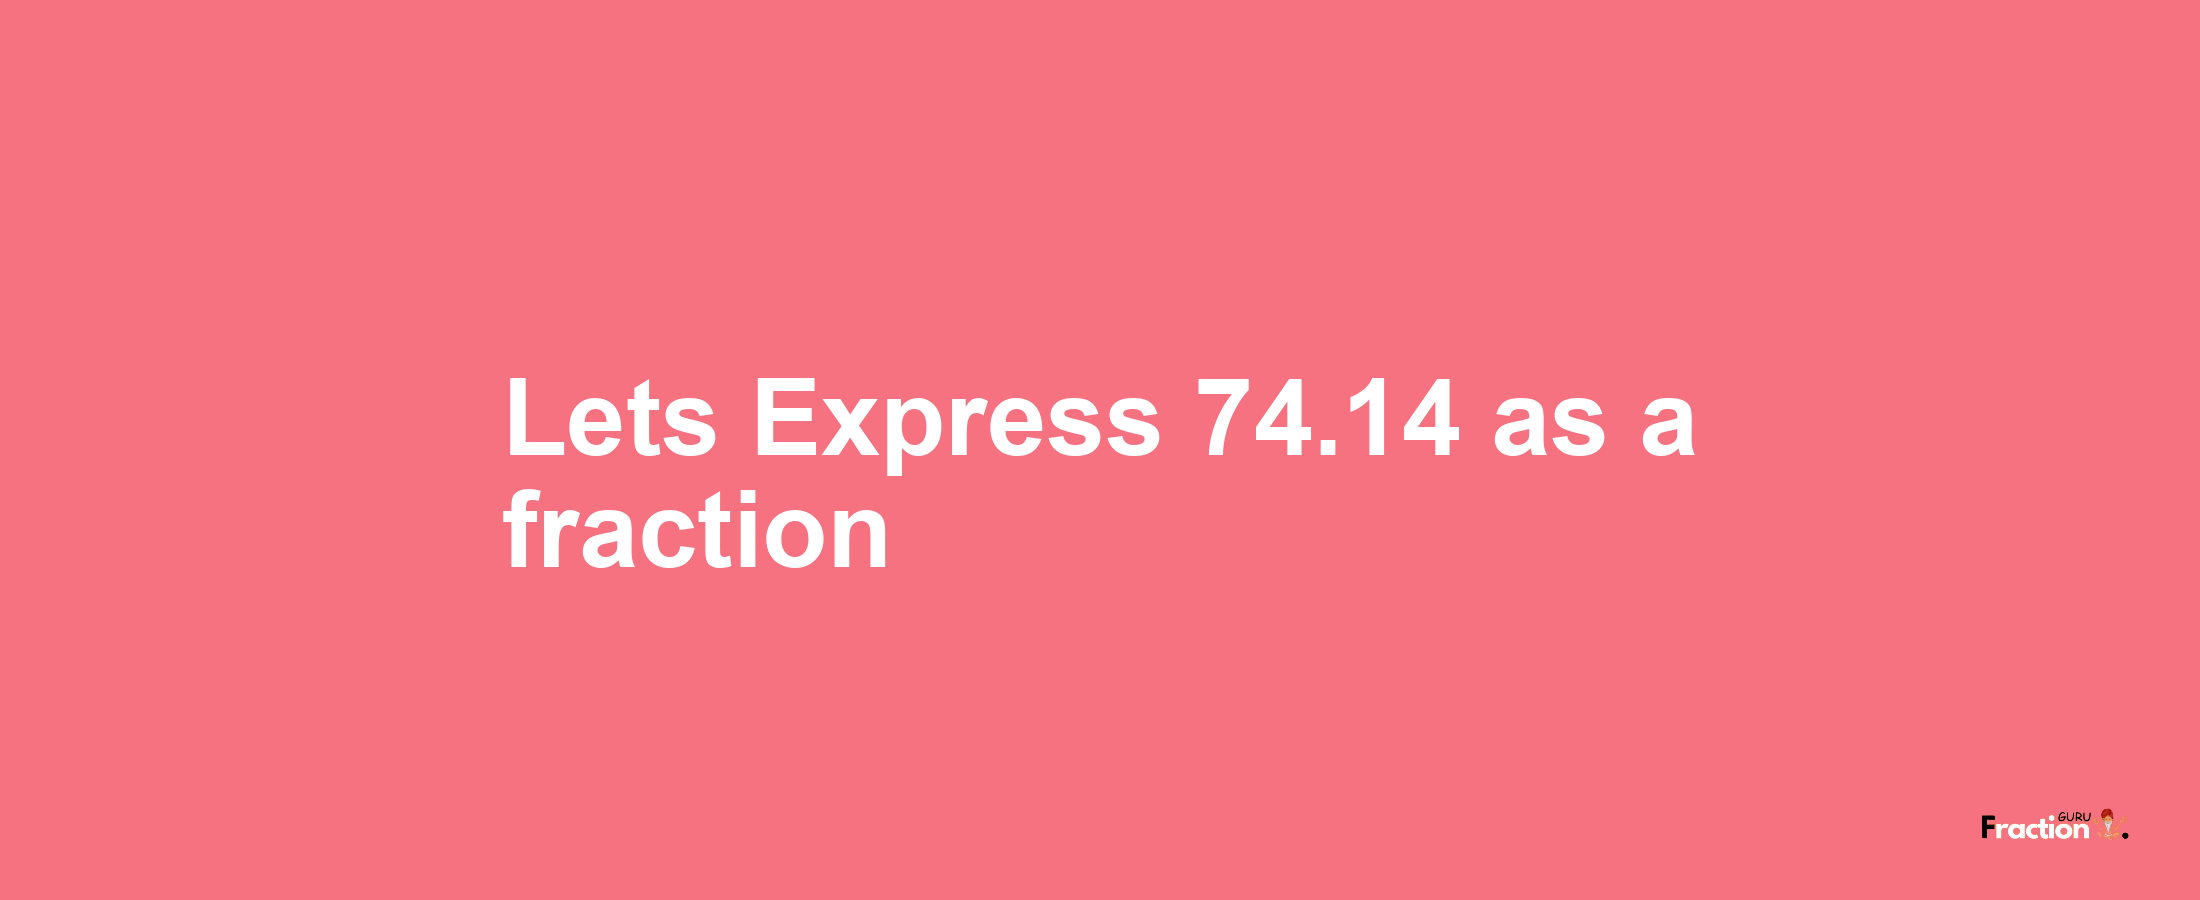 Lets Express 74.14 as afraction